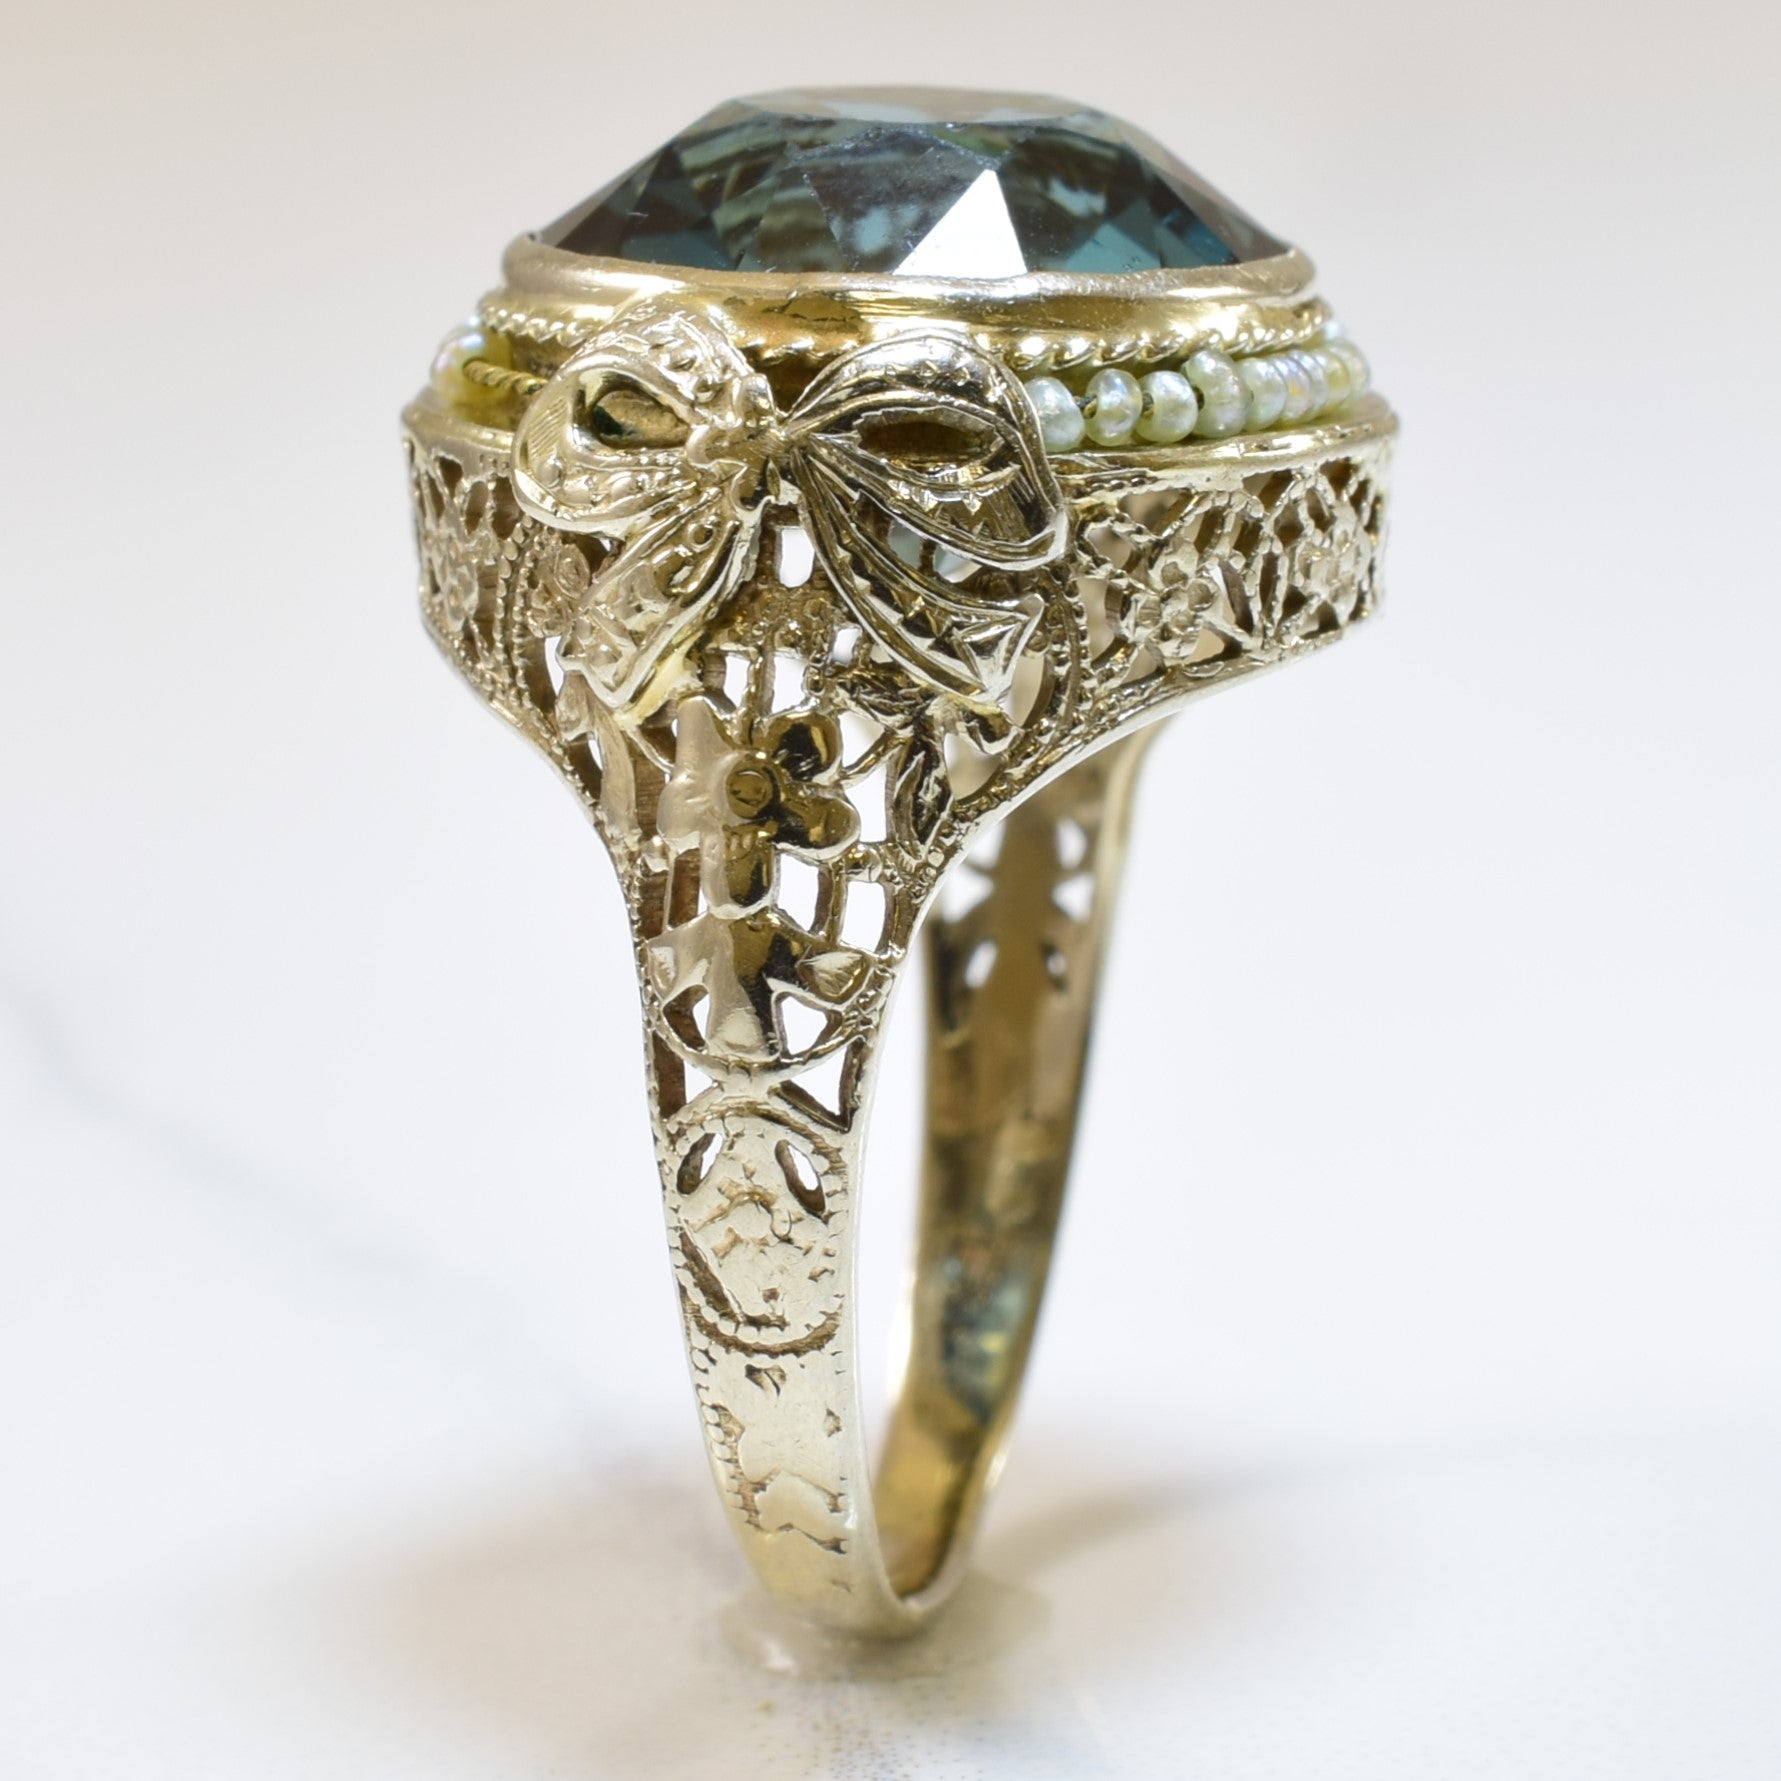 Art Deco Teal Paste & Seed Pearl Ring | 8.30ct, 0.40ctw | SZ 6.5 |